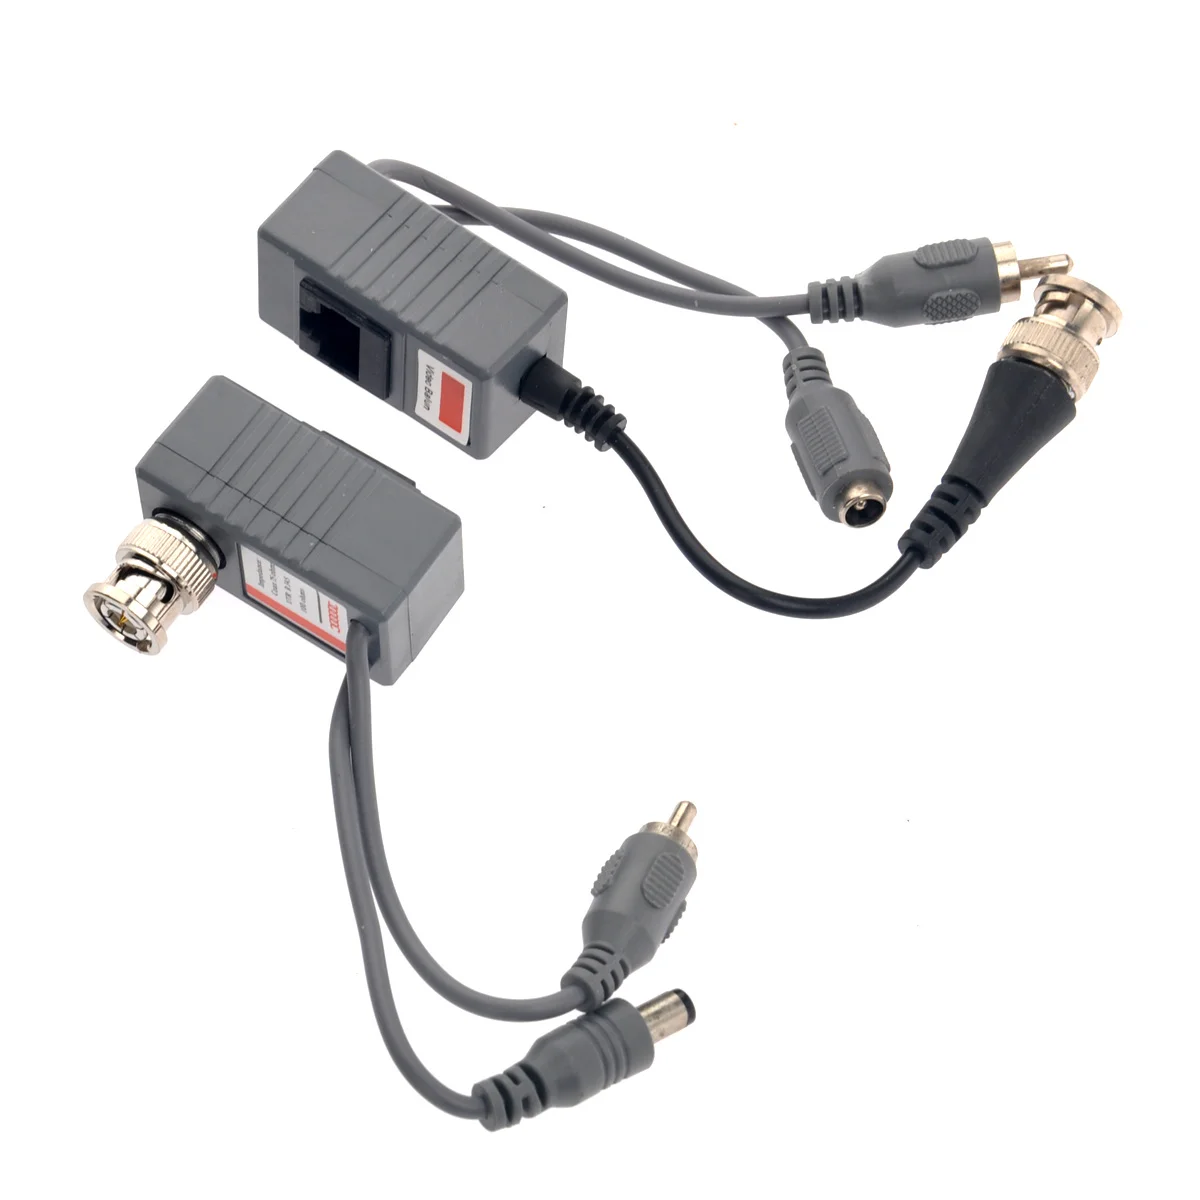 

A Pair of CCTV Camera BNC Coaxial CAT5 Video Balun Transceivers with Video /Audio /Power Connectors (Grey)